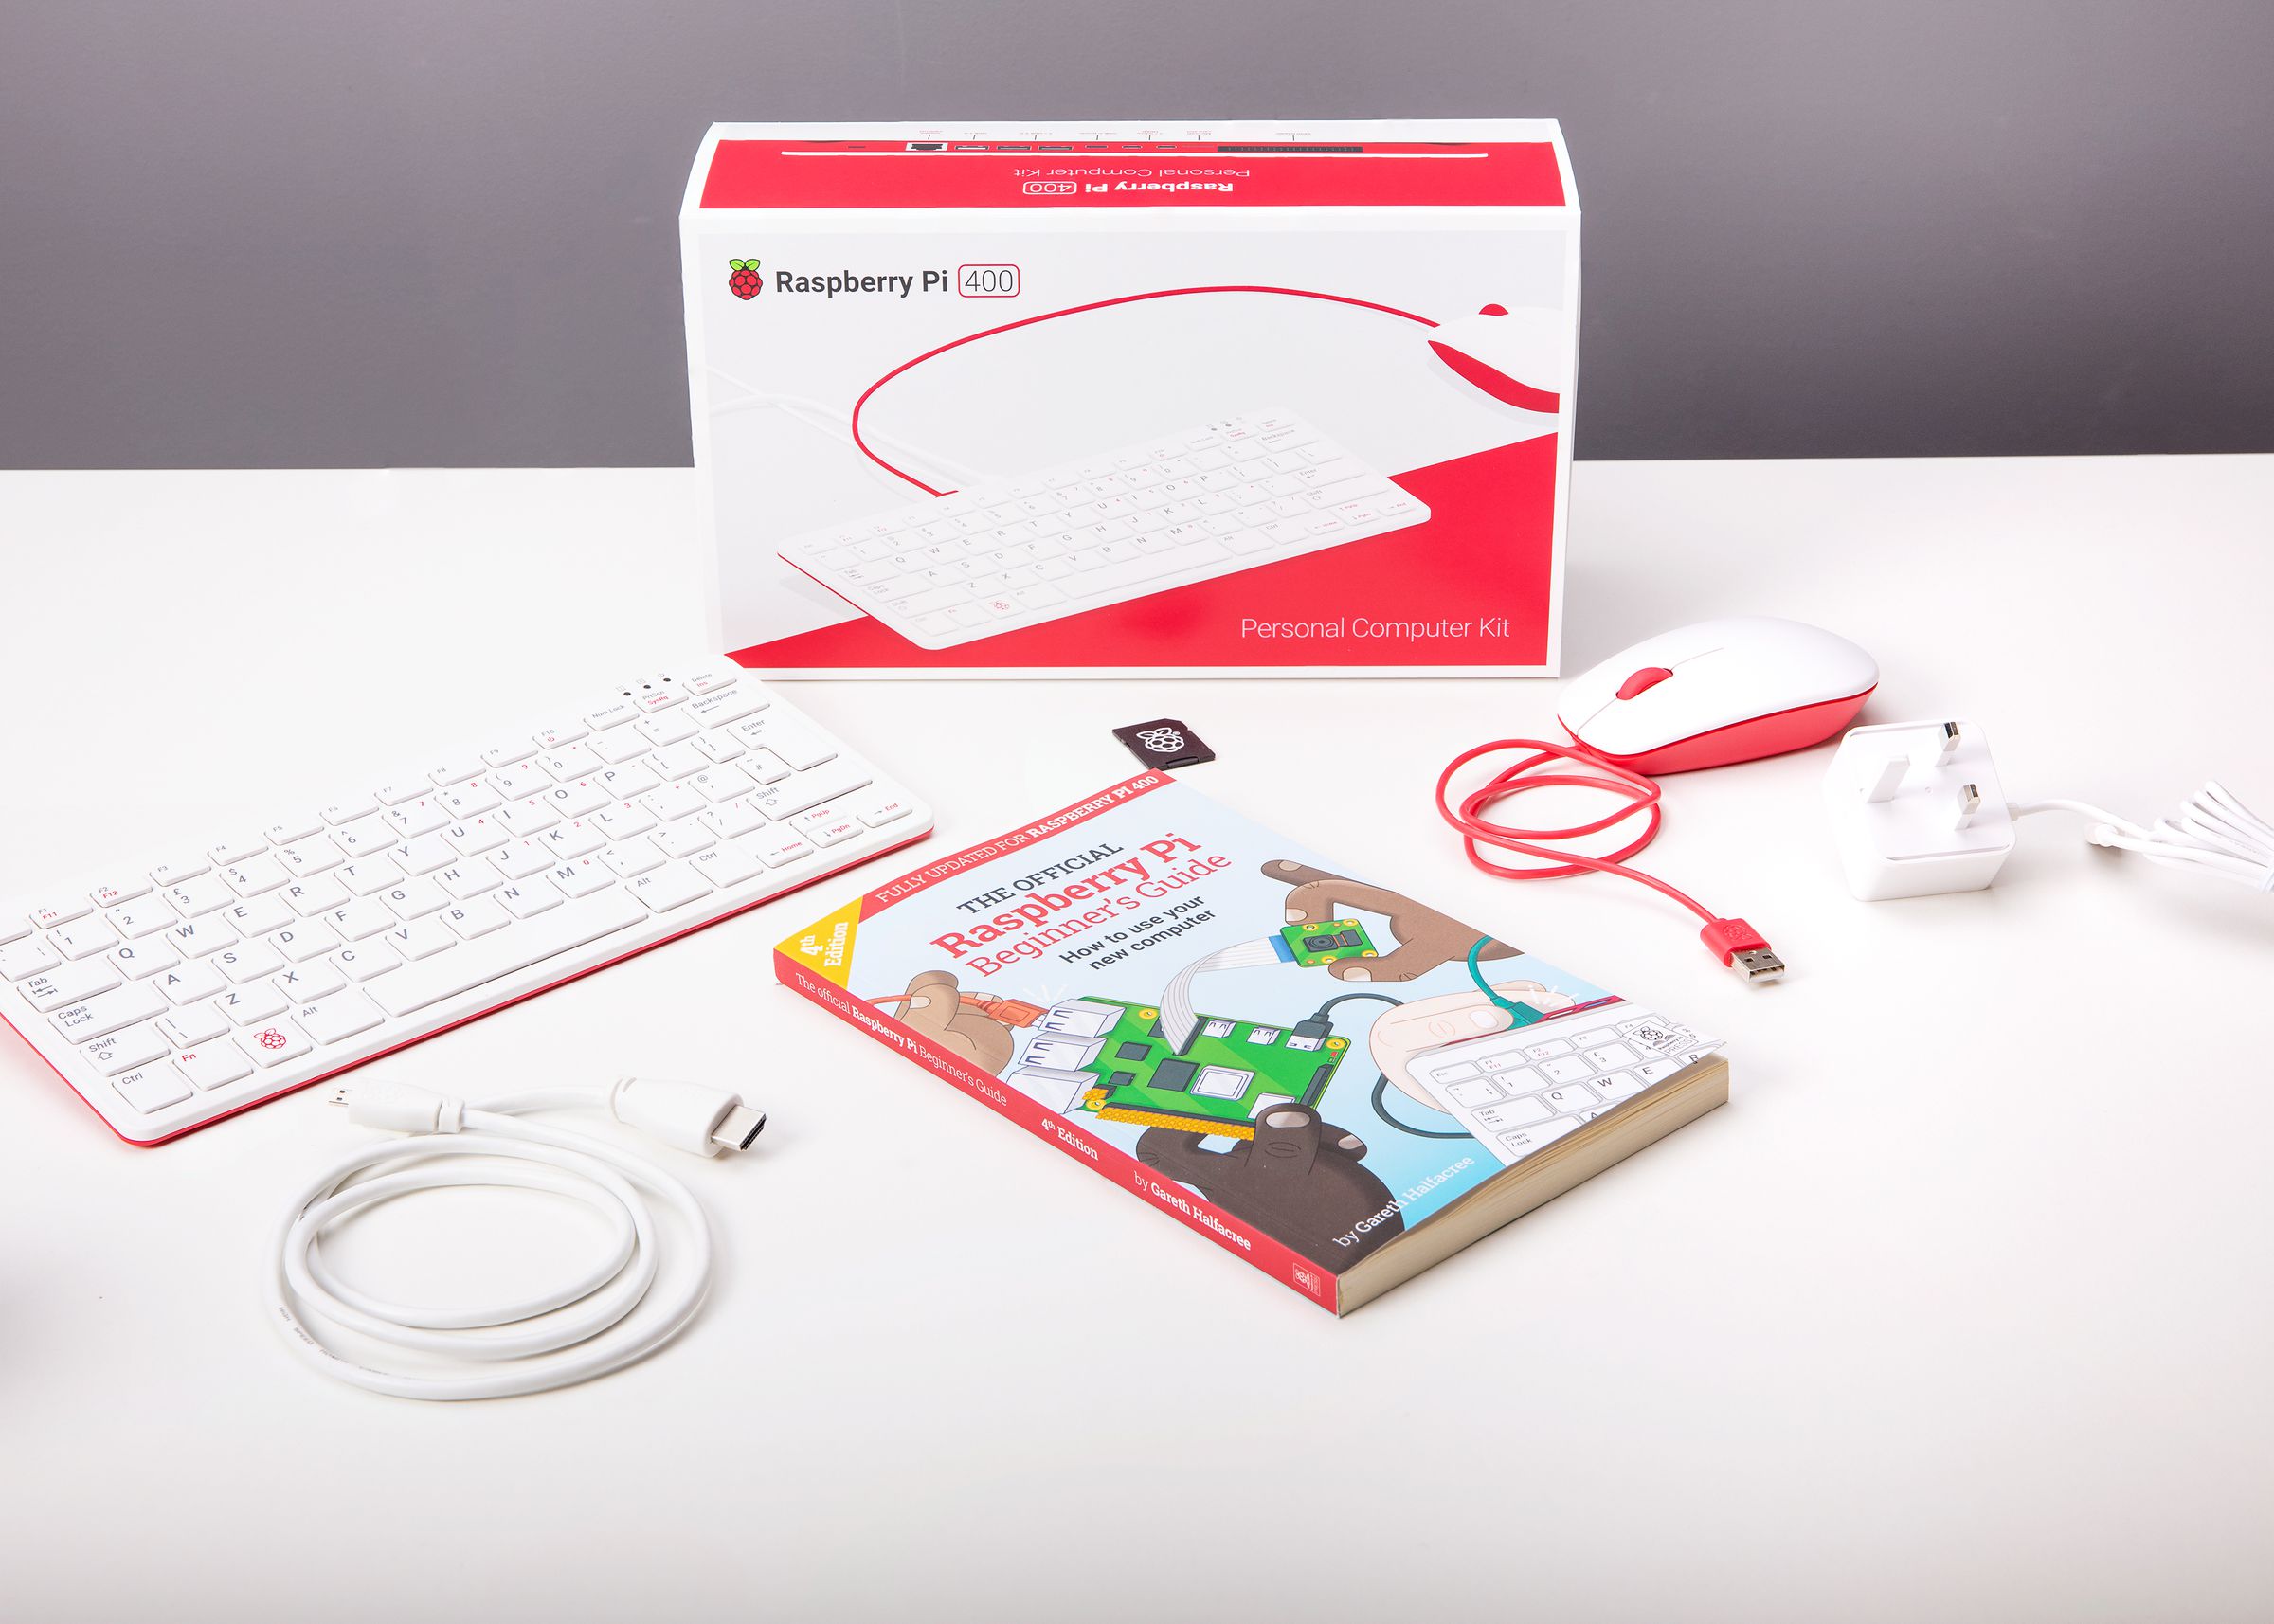 A $100 kit includes the computer itself, as well as accessories like a mouse, HDMI cable, and beginner’s guide.